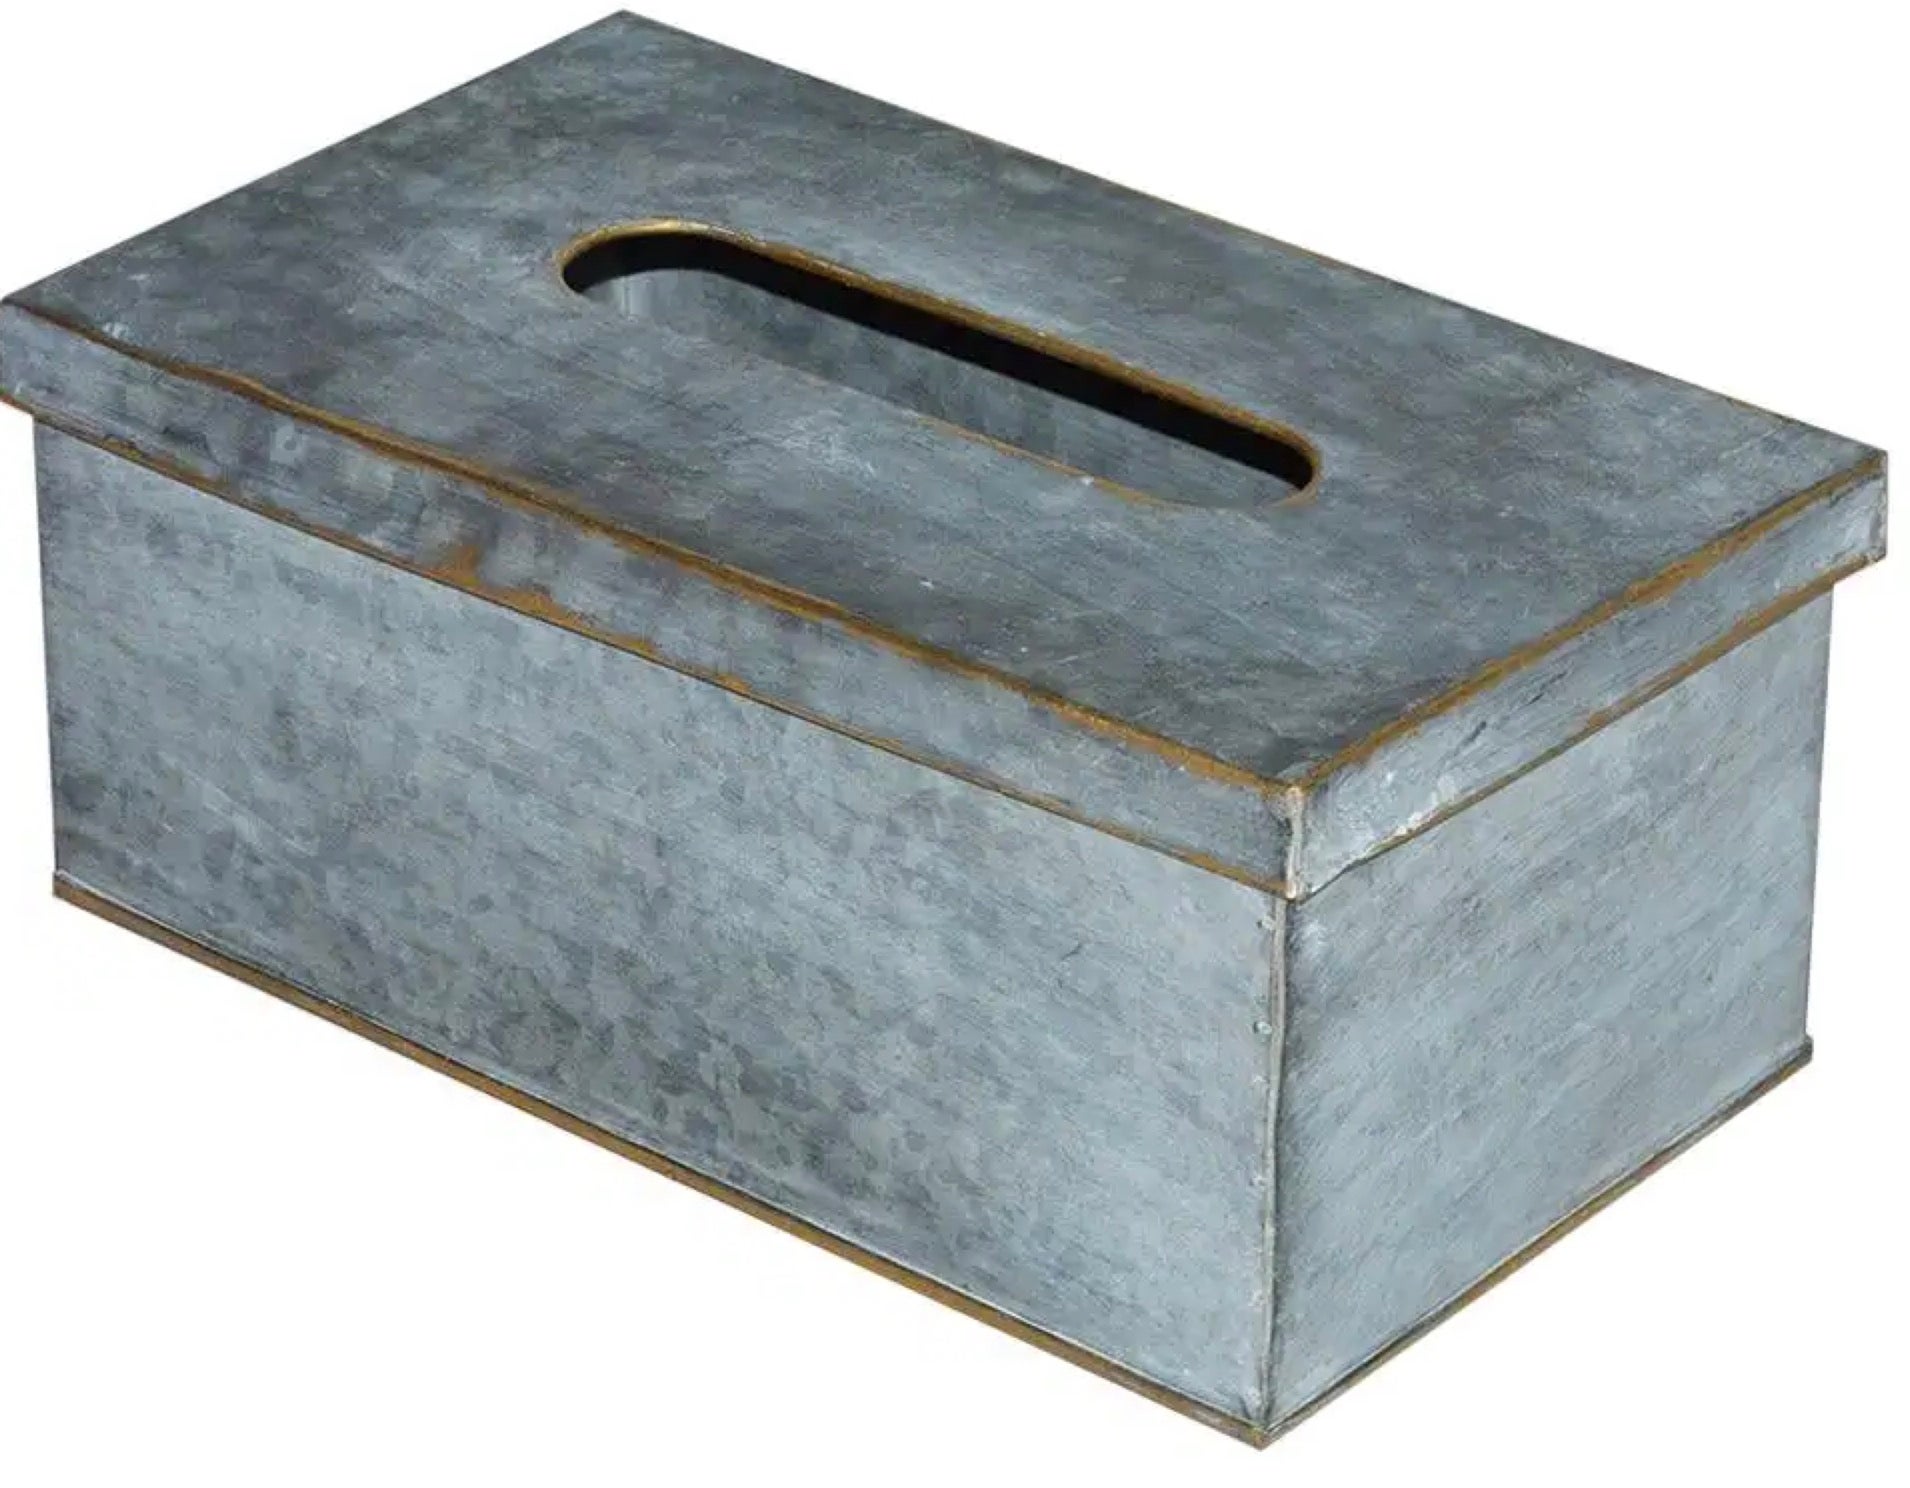 Add a neoclassical country touch to your countertop or nightstand with a gold gilt edge galvanized tissue box and add fashion and protection for your facial tissue at the same time -- enhancing the old fashioned feel of your bathroom or any room